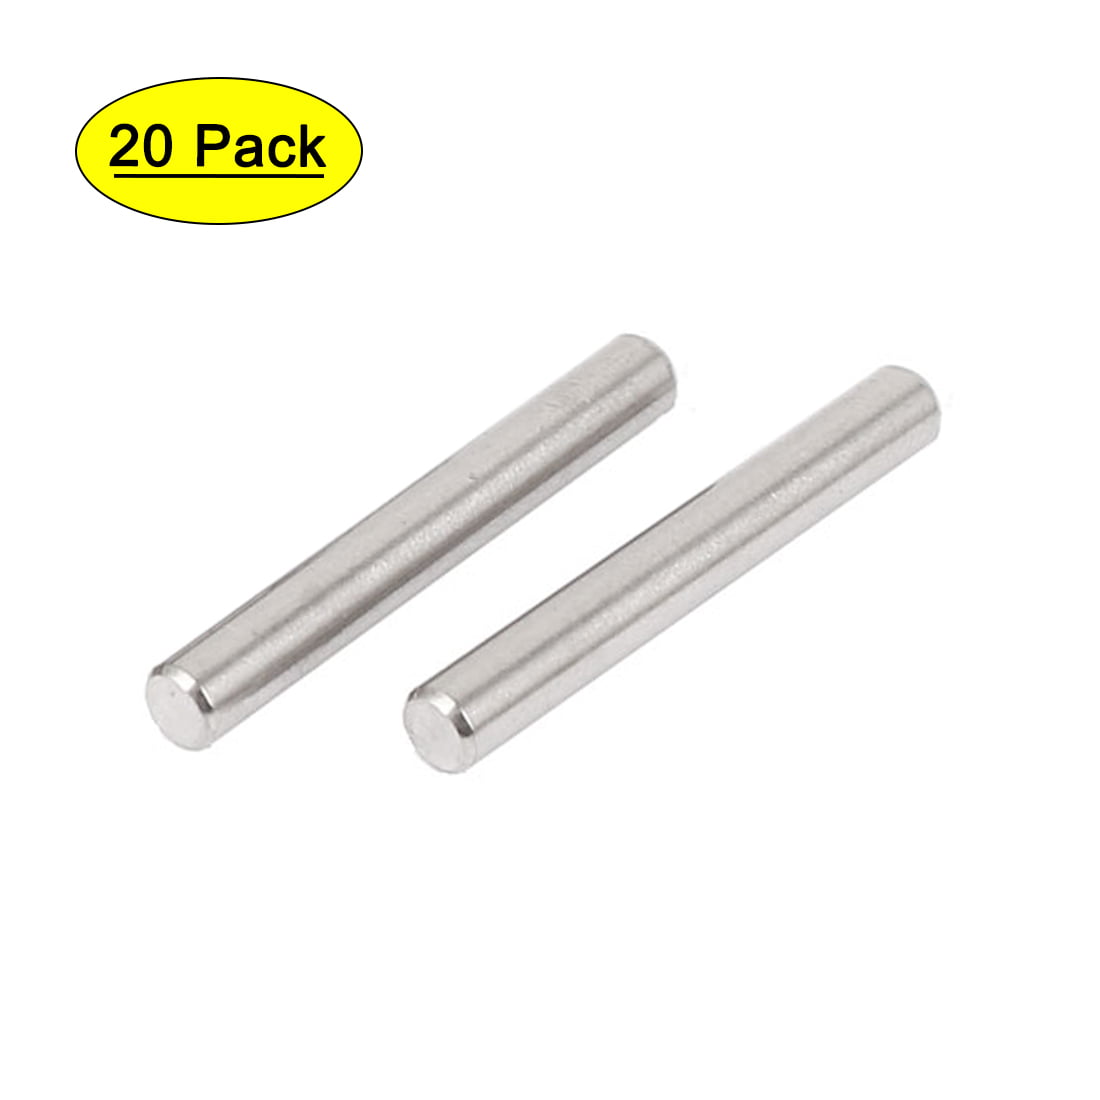 18-8 Stainless Steel Metric Dowel Pins M4 Dia x 36 mm Length 20 Pieces 